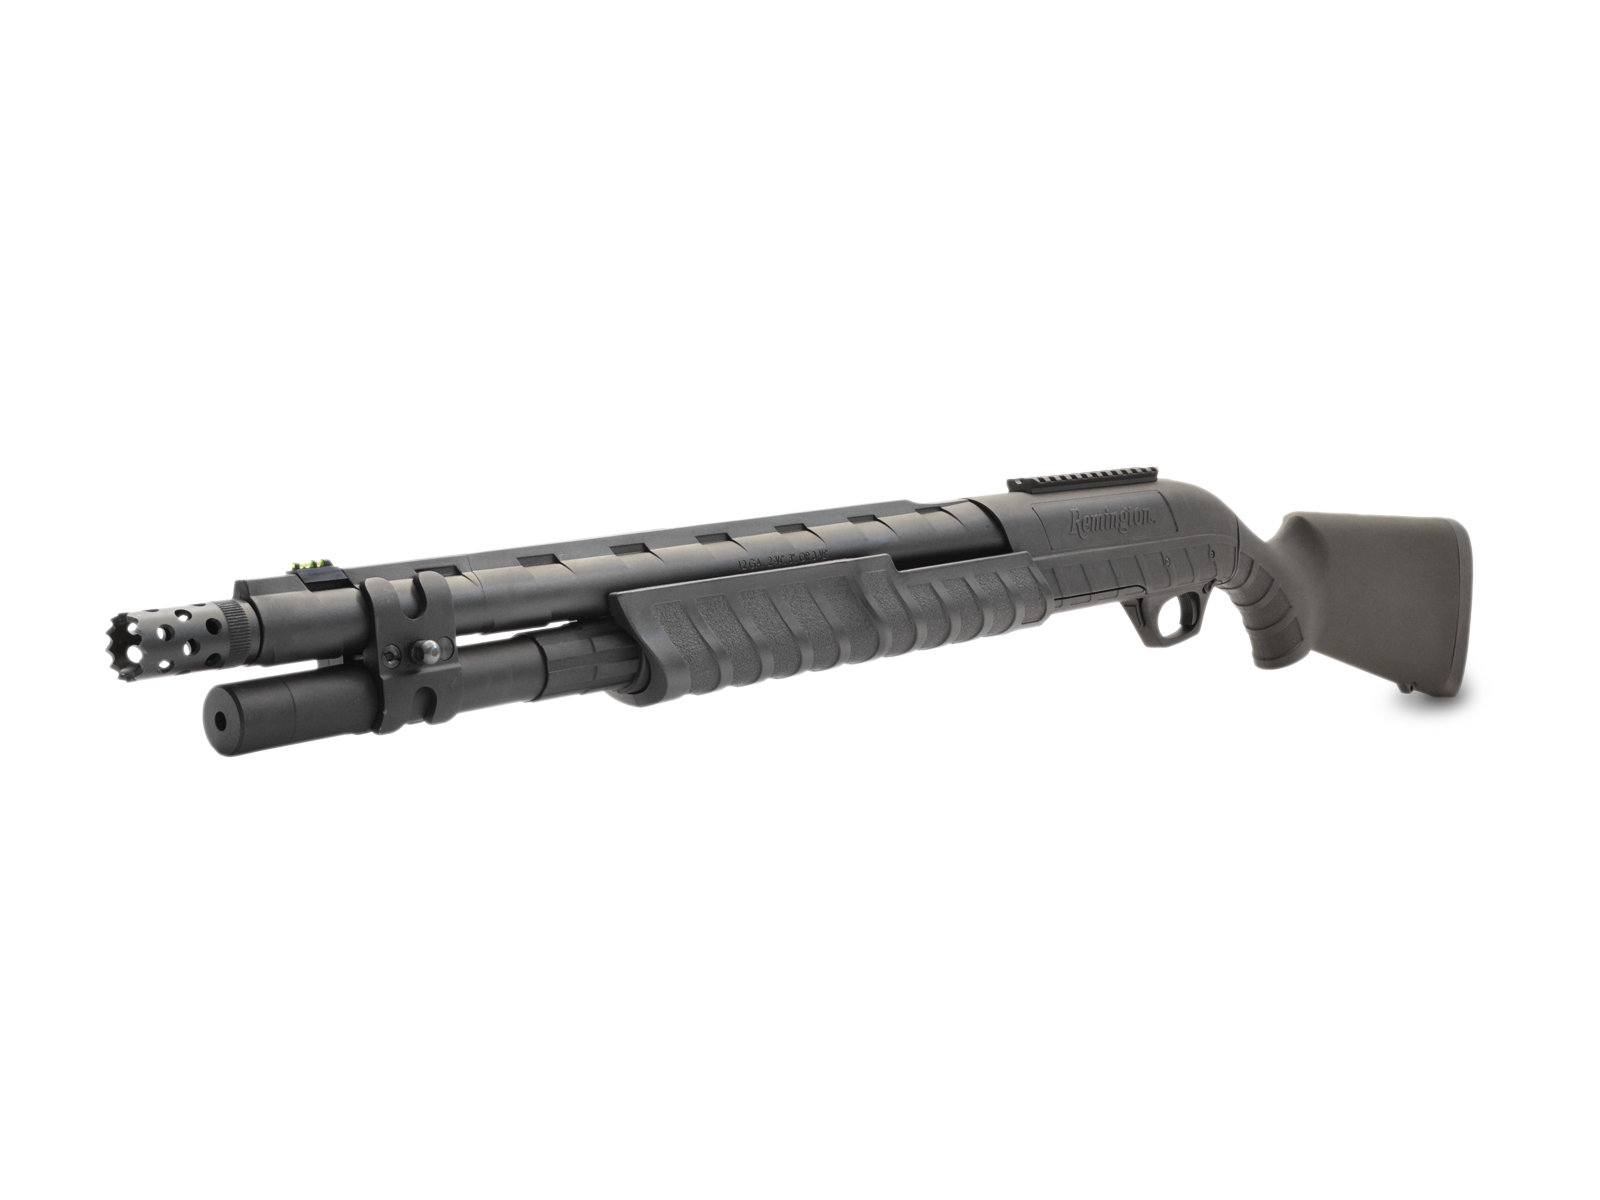 Remington_887_Perspective_Front_1600x1200.png 